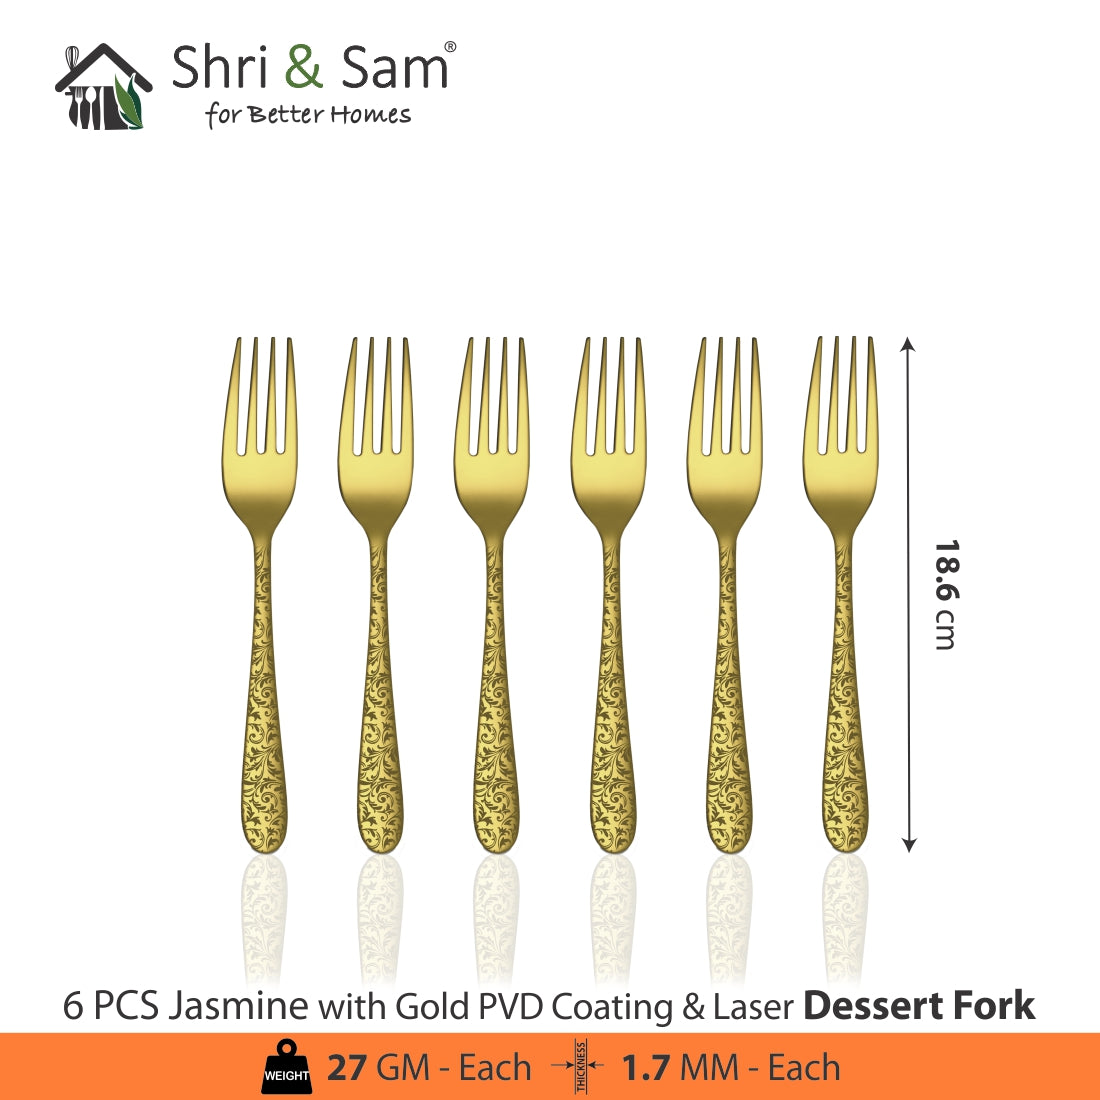 Stainless Steel Cutlery with Gold PVD Coating & Laser Jasmine